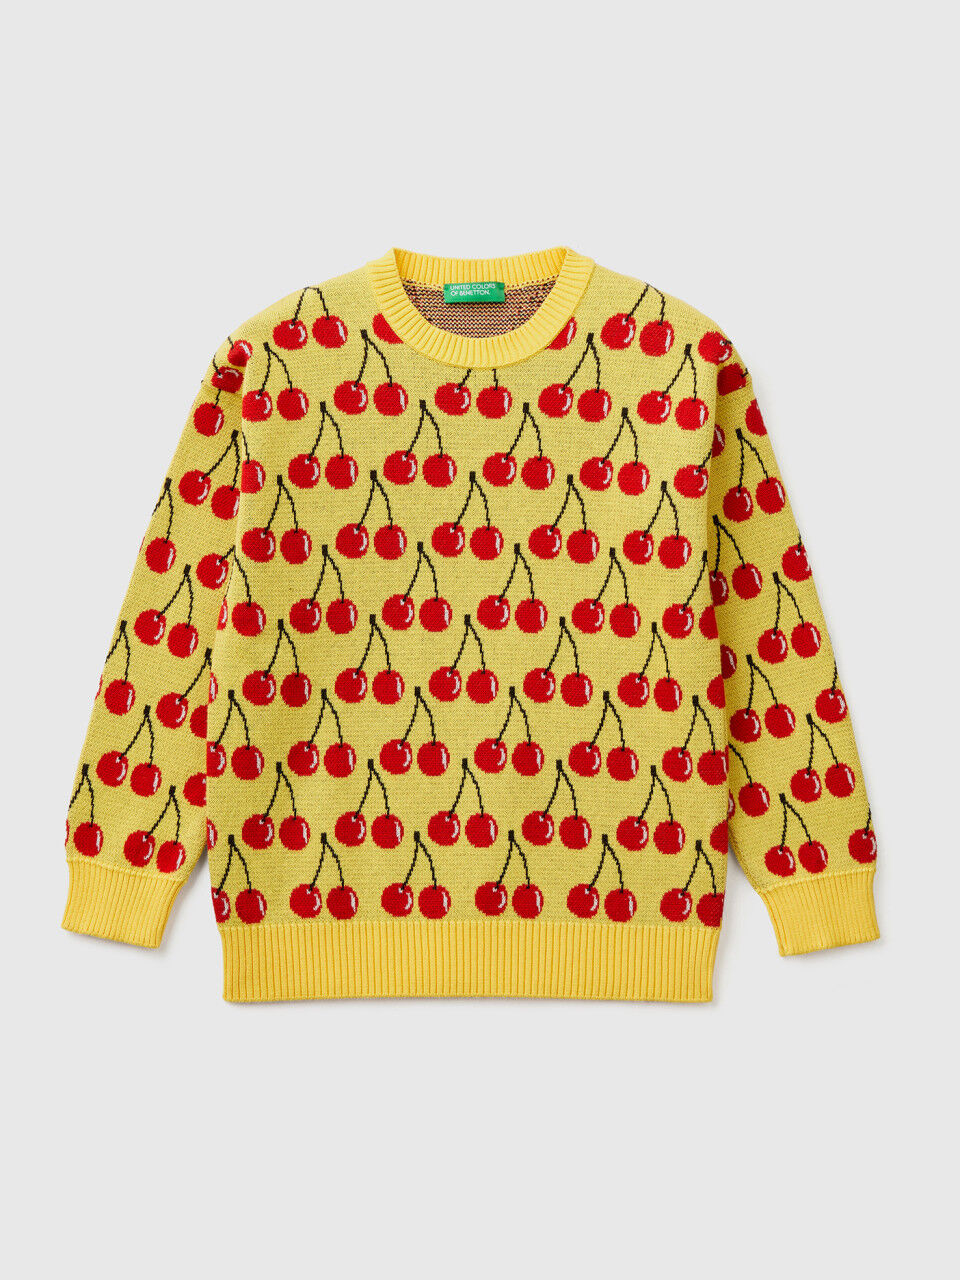 Yellow sweater with cherry pattern